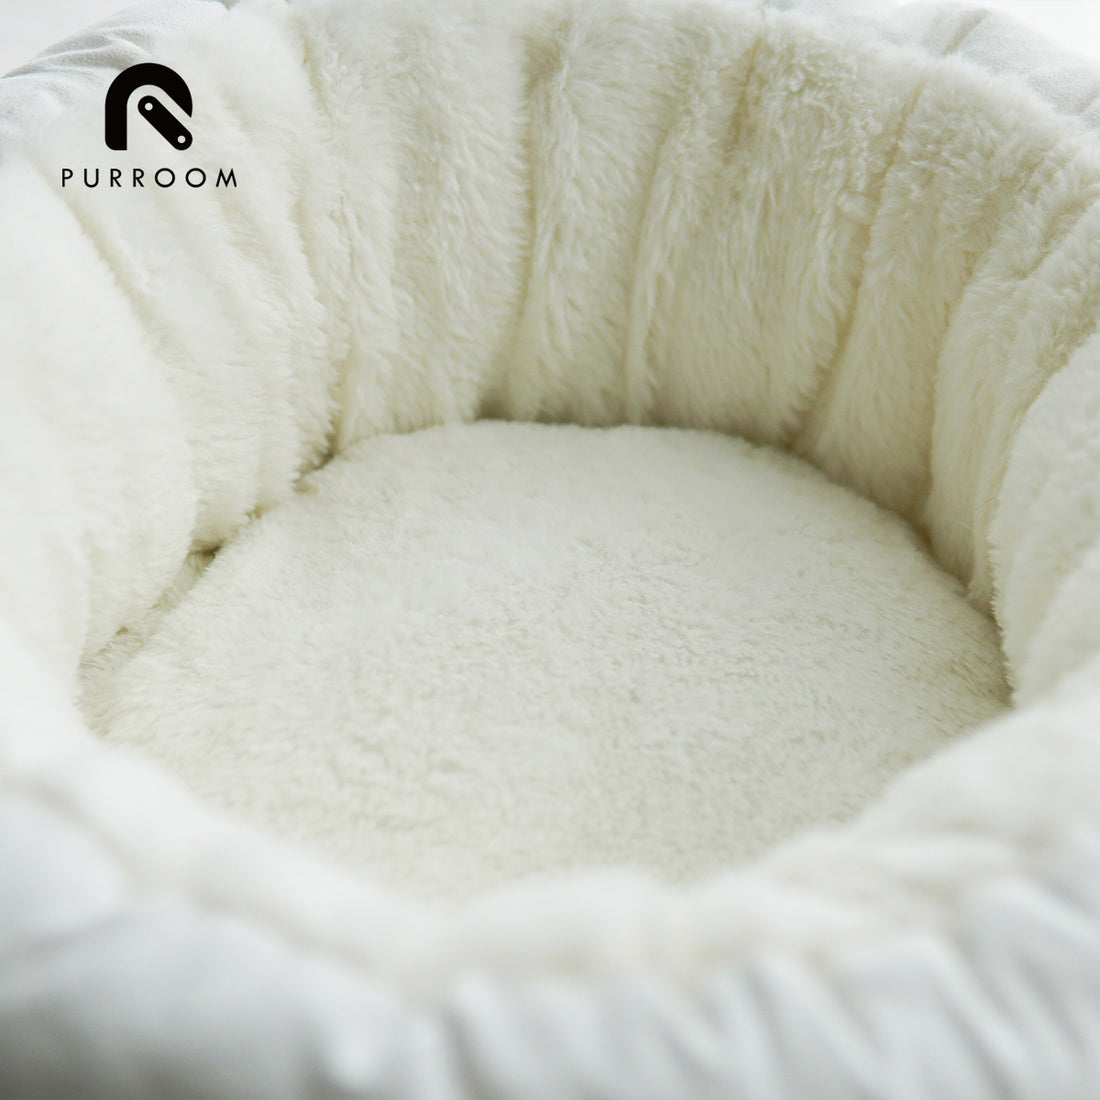 【PURROOM】Little Chick Comfy Pet Bed